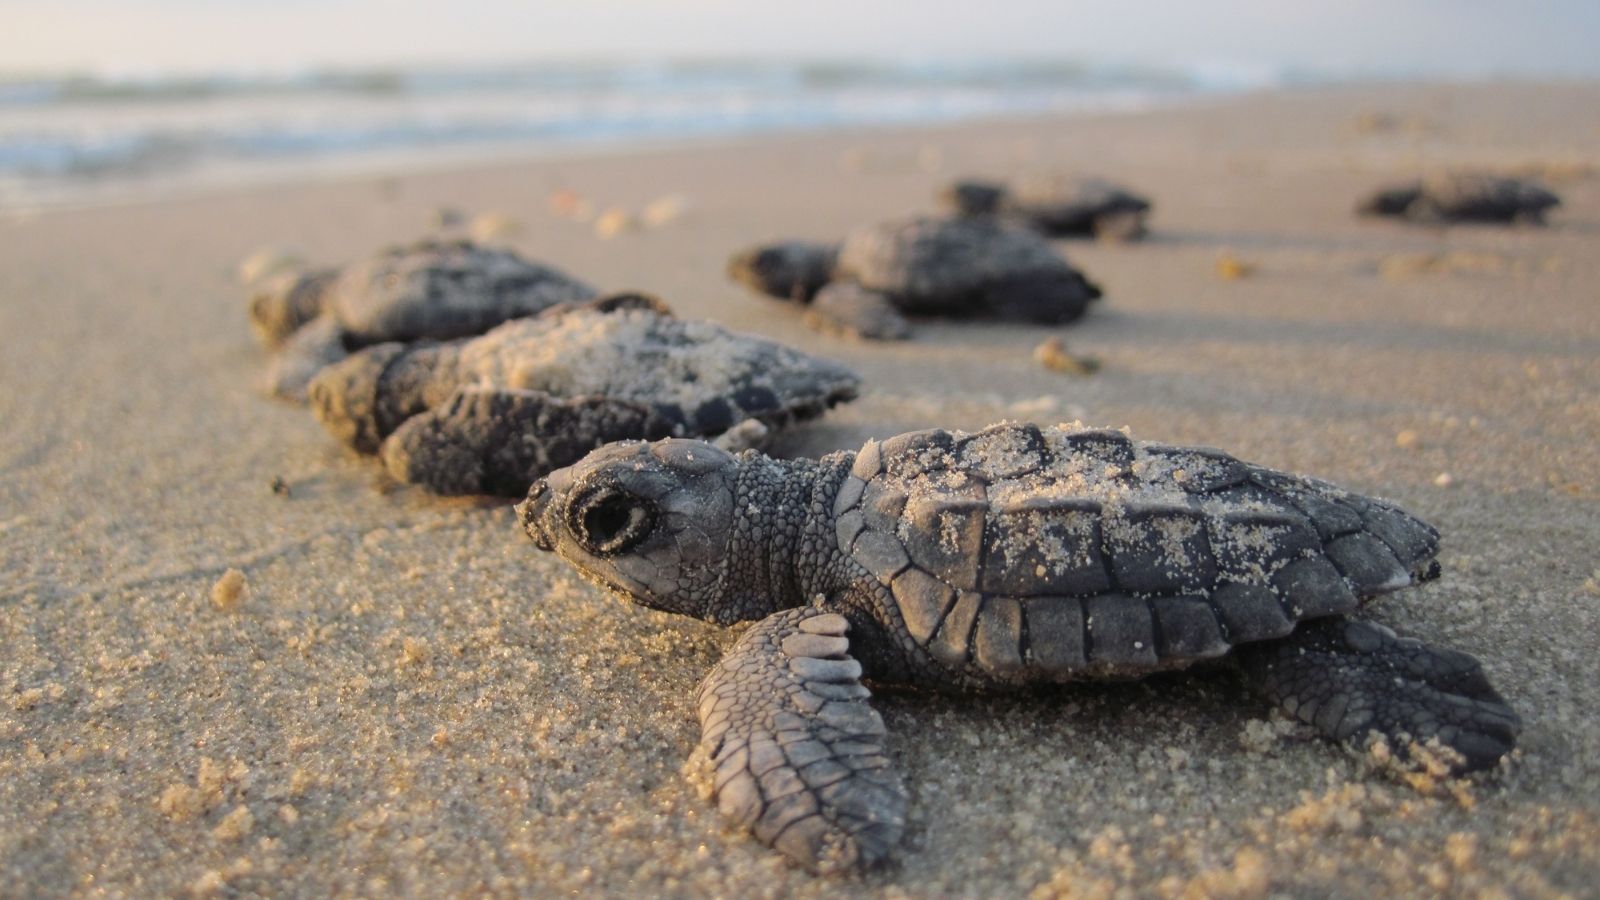 Kemp's Ridley hatchlings on their way to sea.